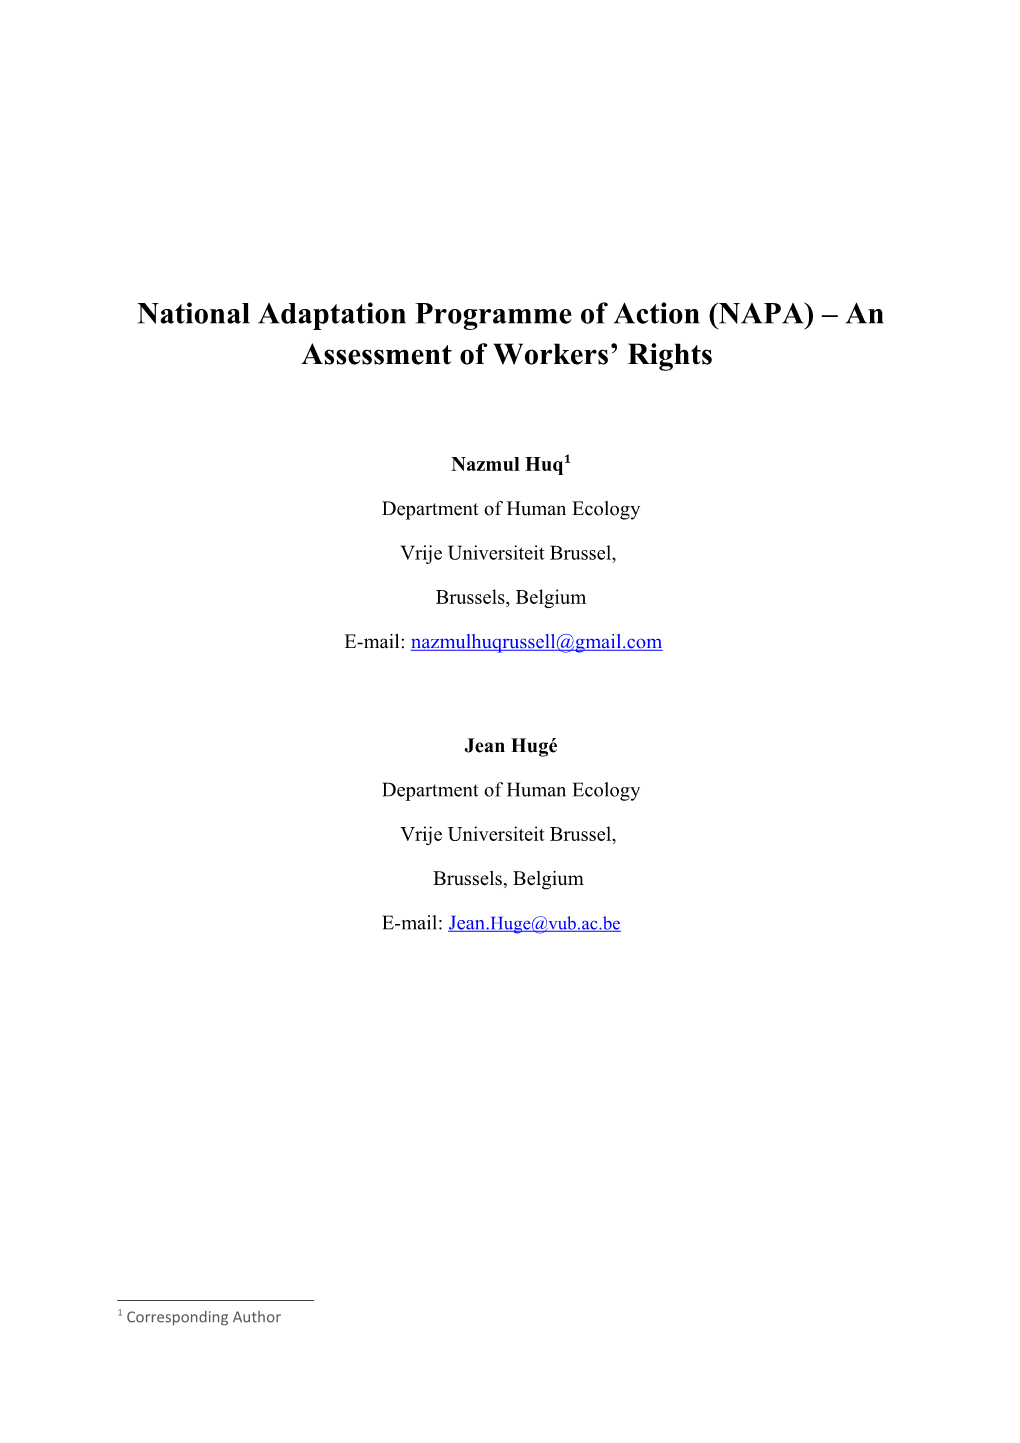 National Adaptation Programme of Action (NAPA) Looking Through the Lens of Rights